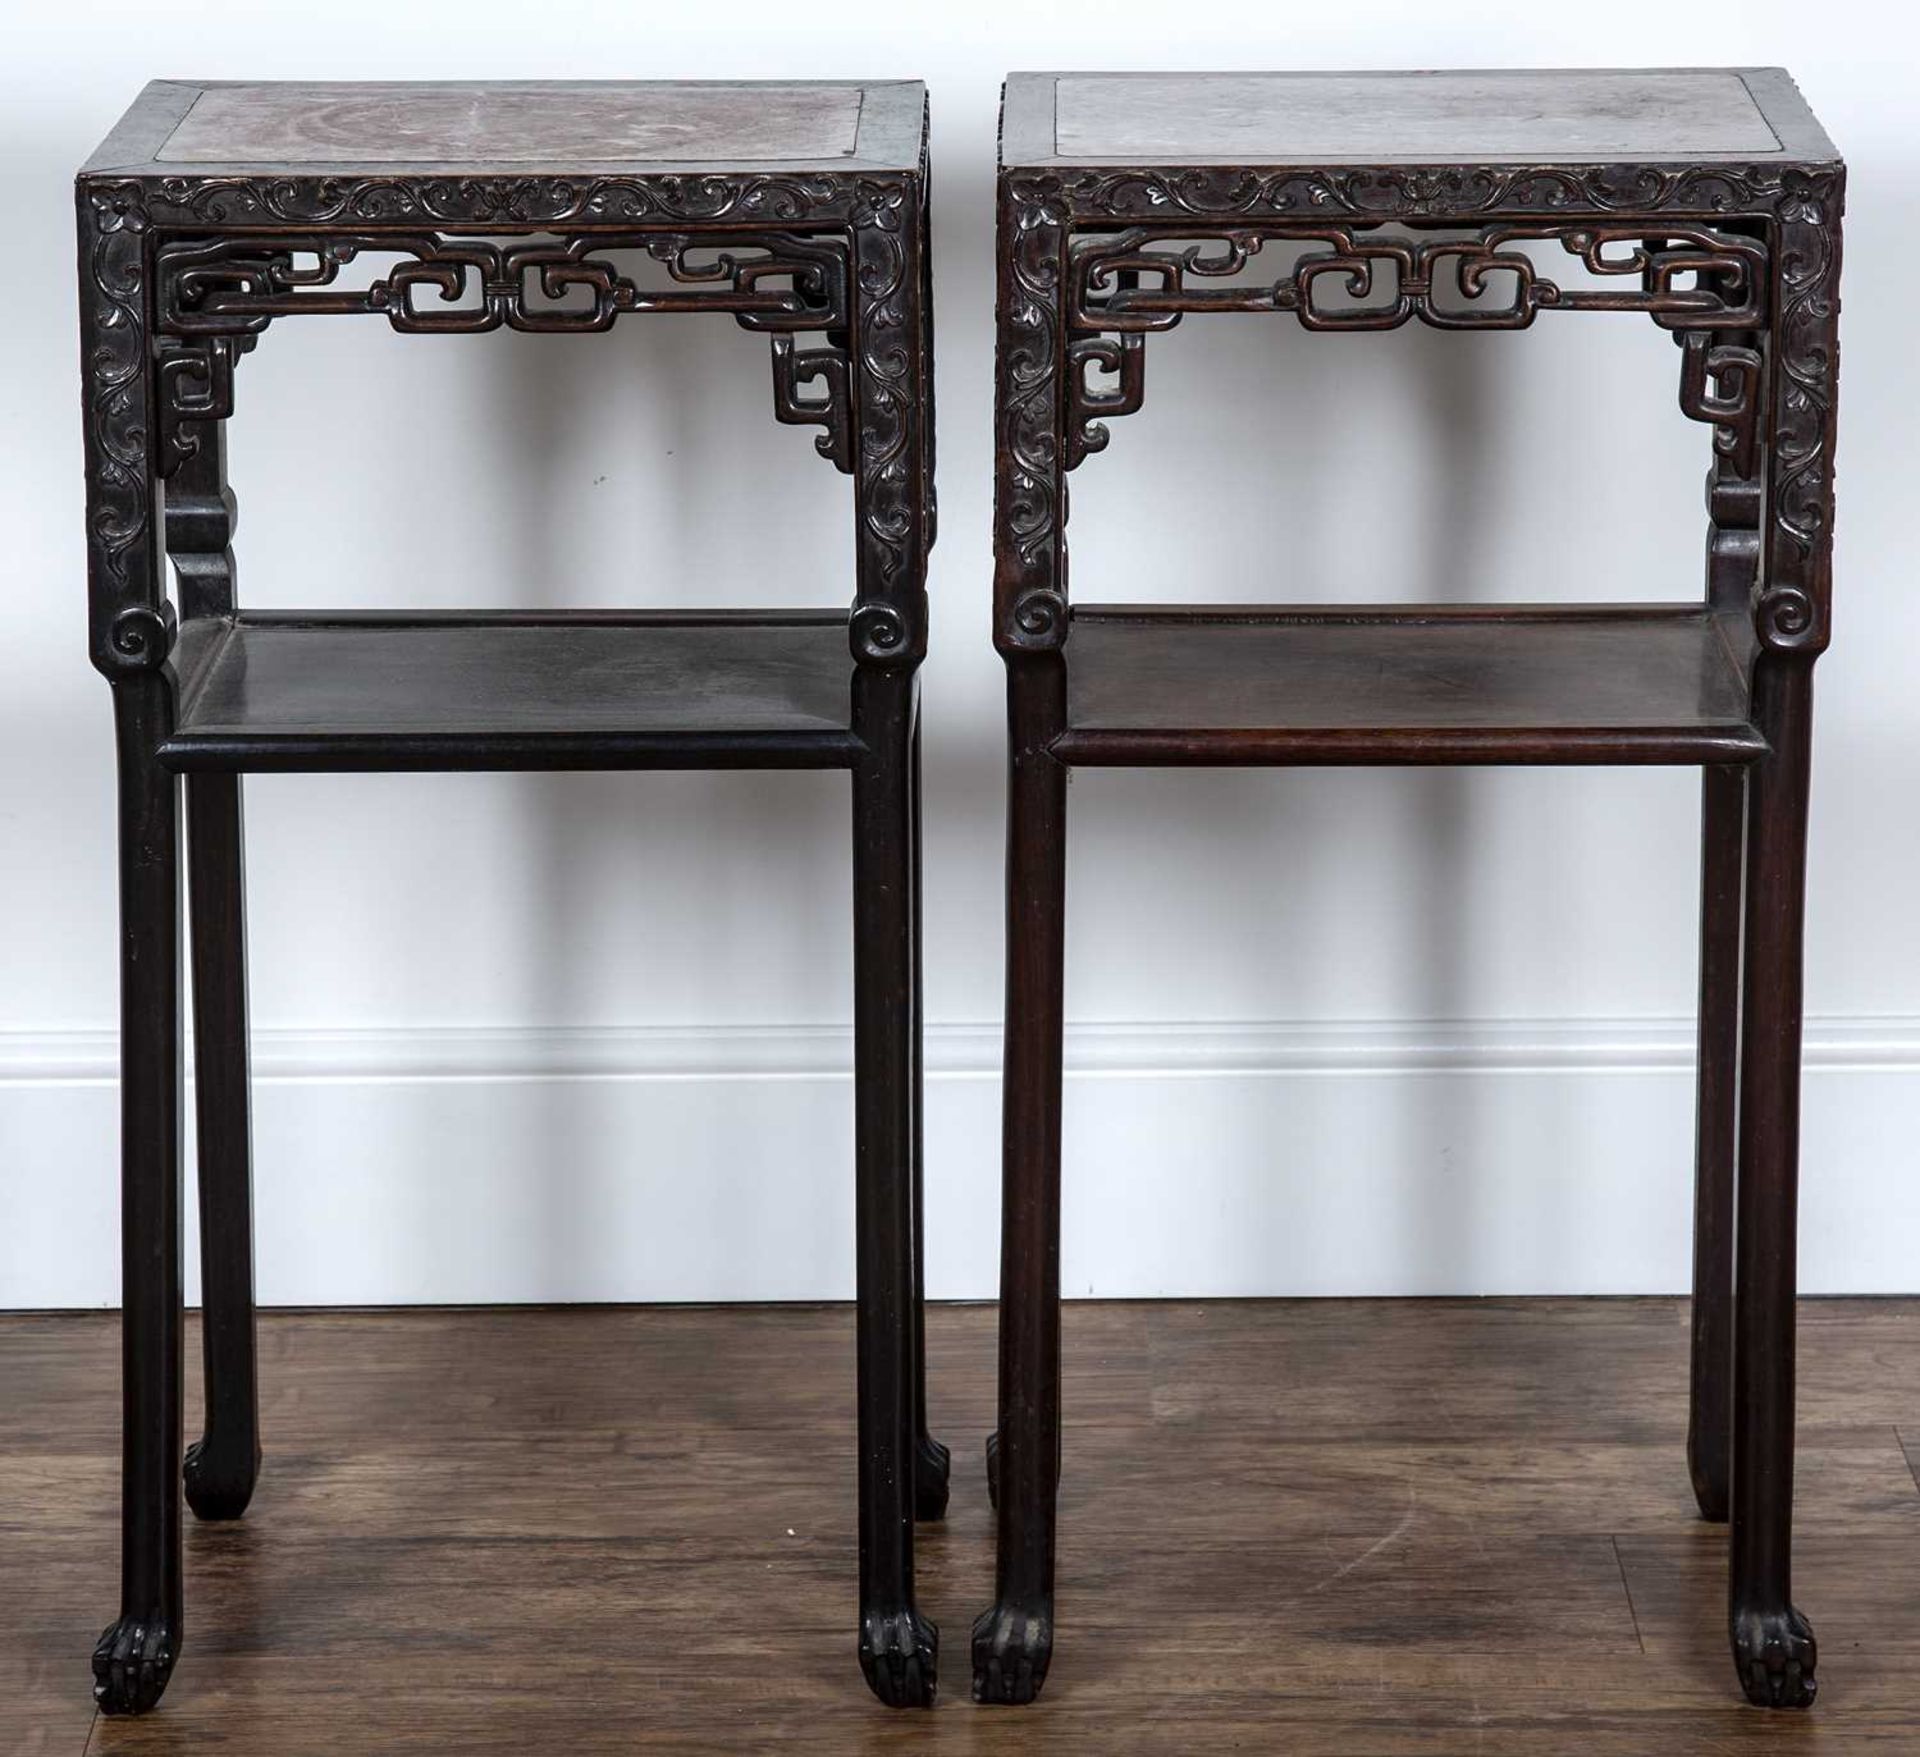 Pair of marble inset tables Chinese, late 19th Century with foliate carved and decorative friezes, - Image 5 of 6